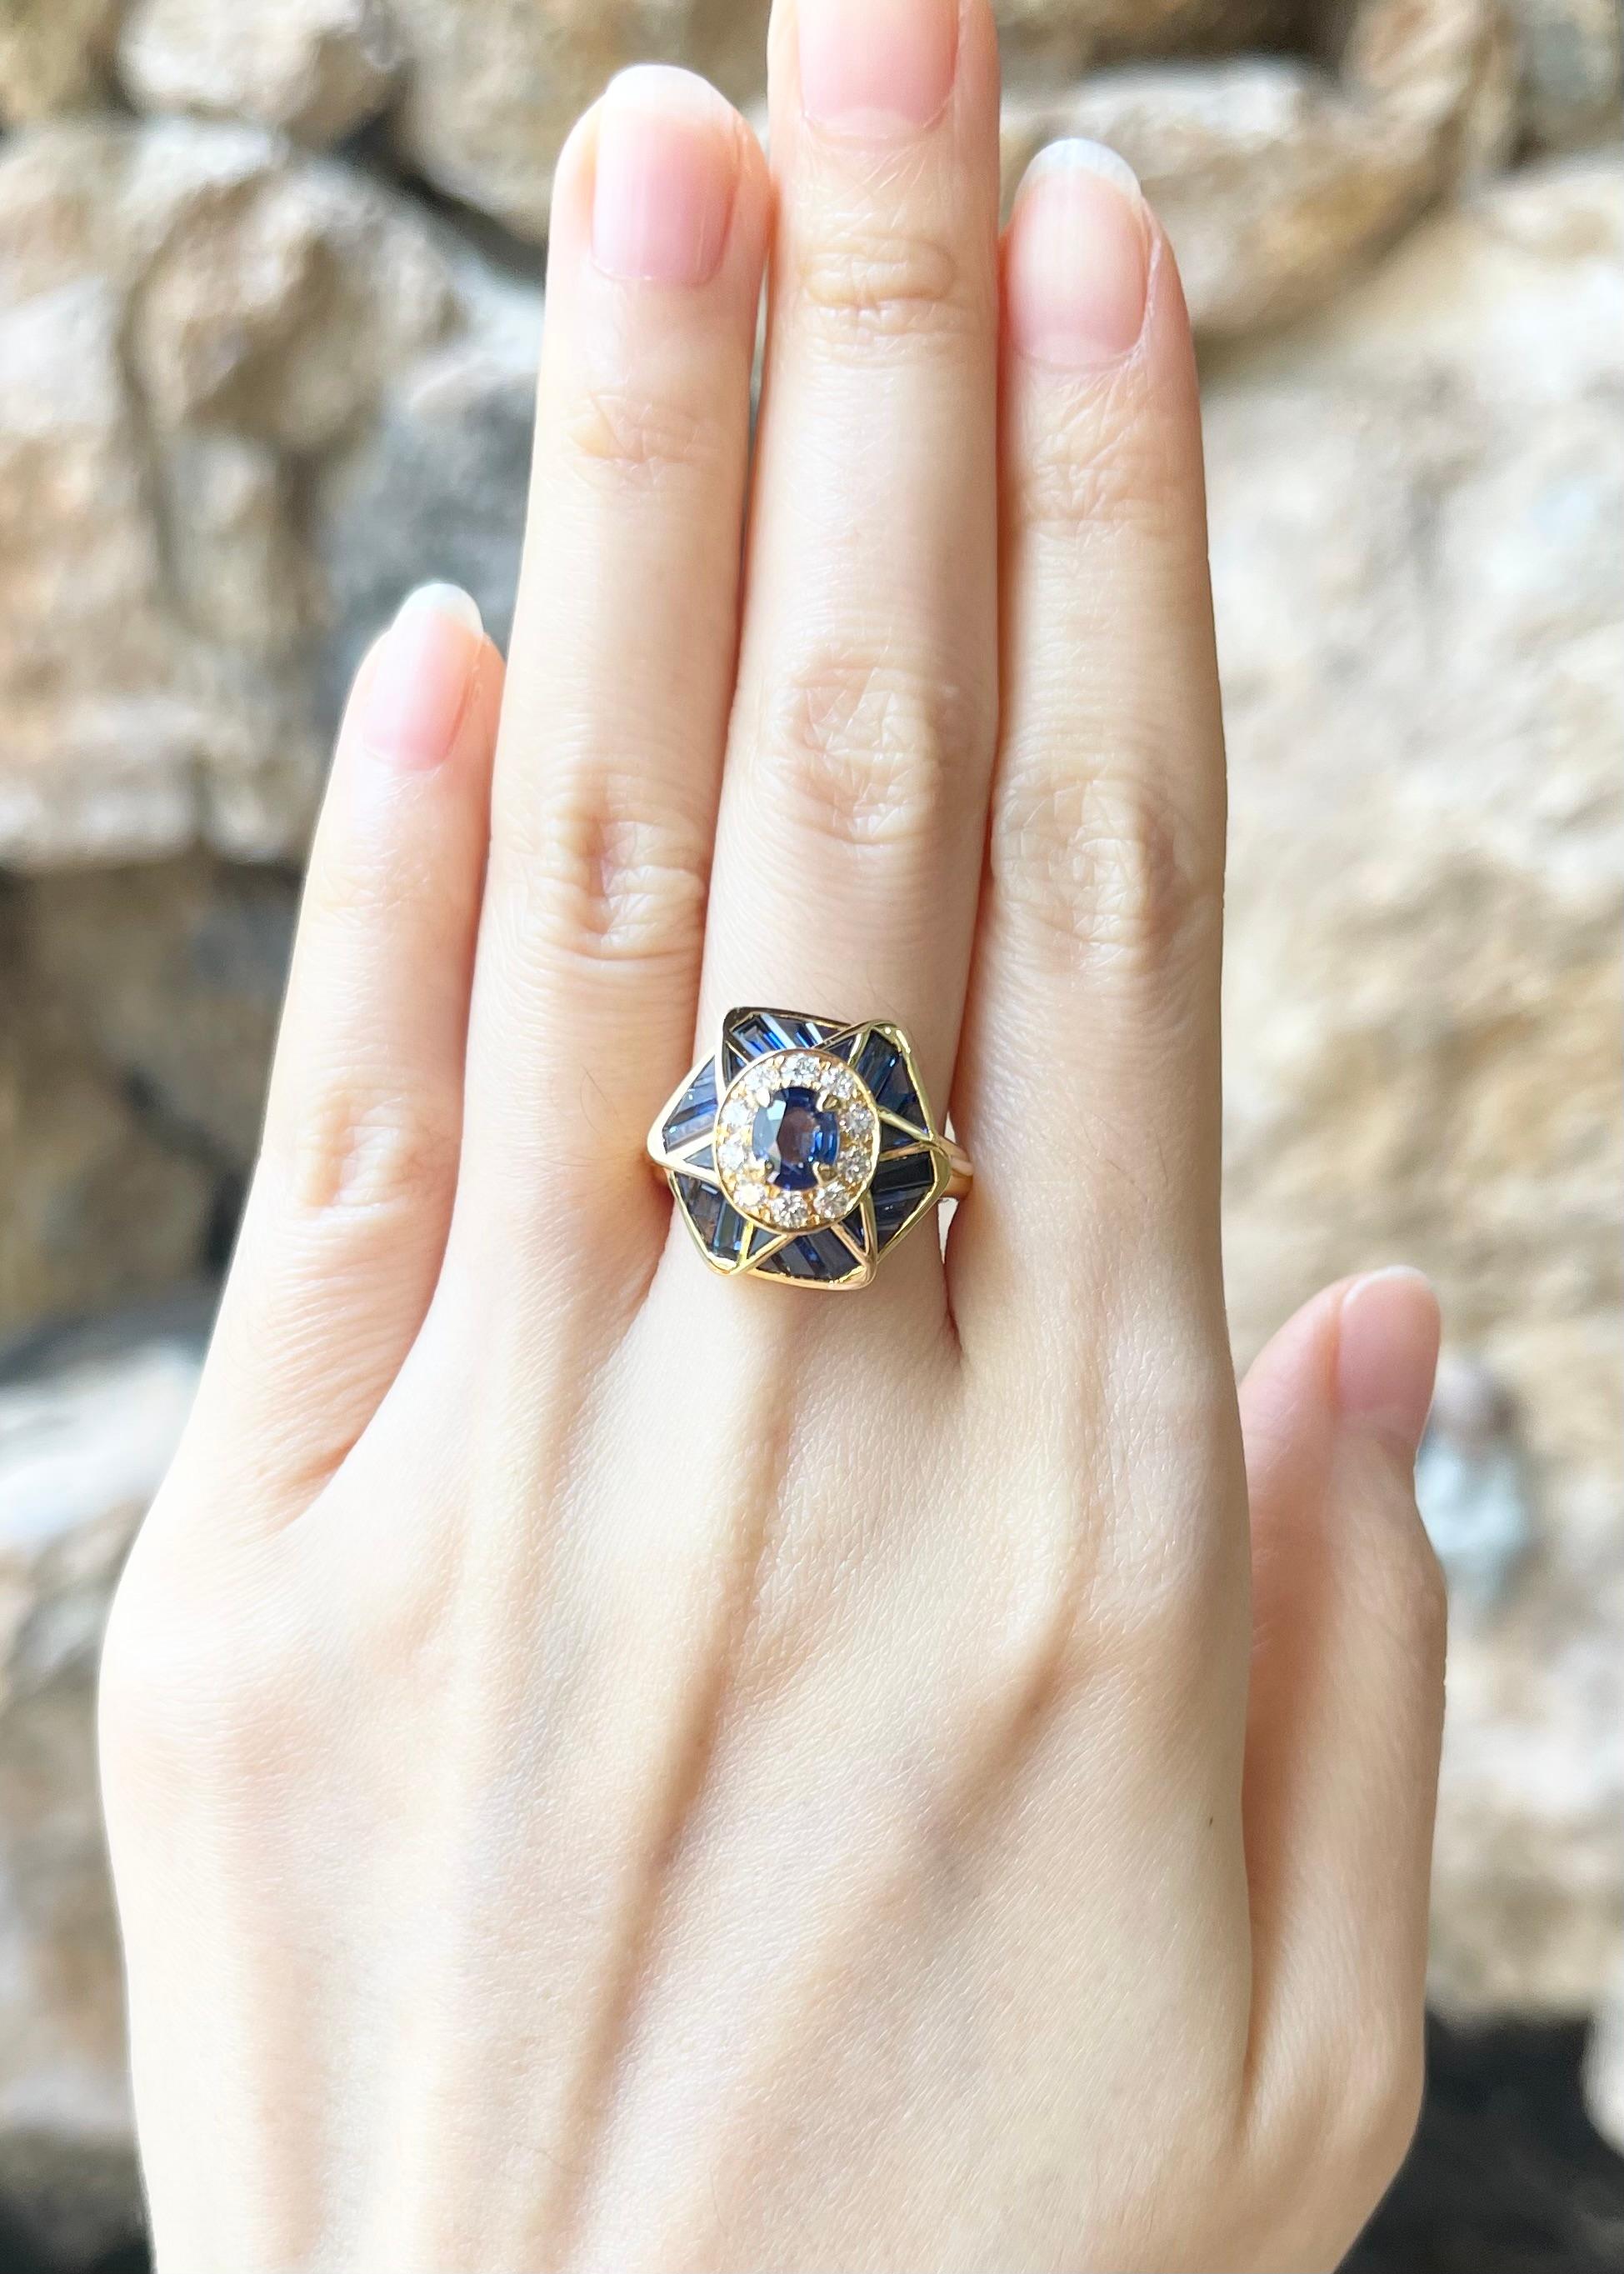 Blue Sapphire 0.75 carat, Blue Sapphire 2.30 carats and Diamond 0.35 carat Ring set in 18K Gold Settings

Width:  2.3 cm 
Length: 2.2 cm
Ring Size: 54
Total Weight: 8.24 grams

